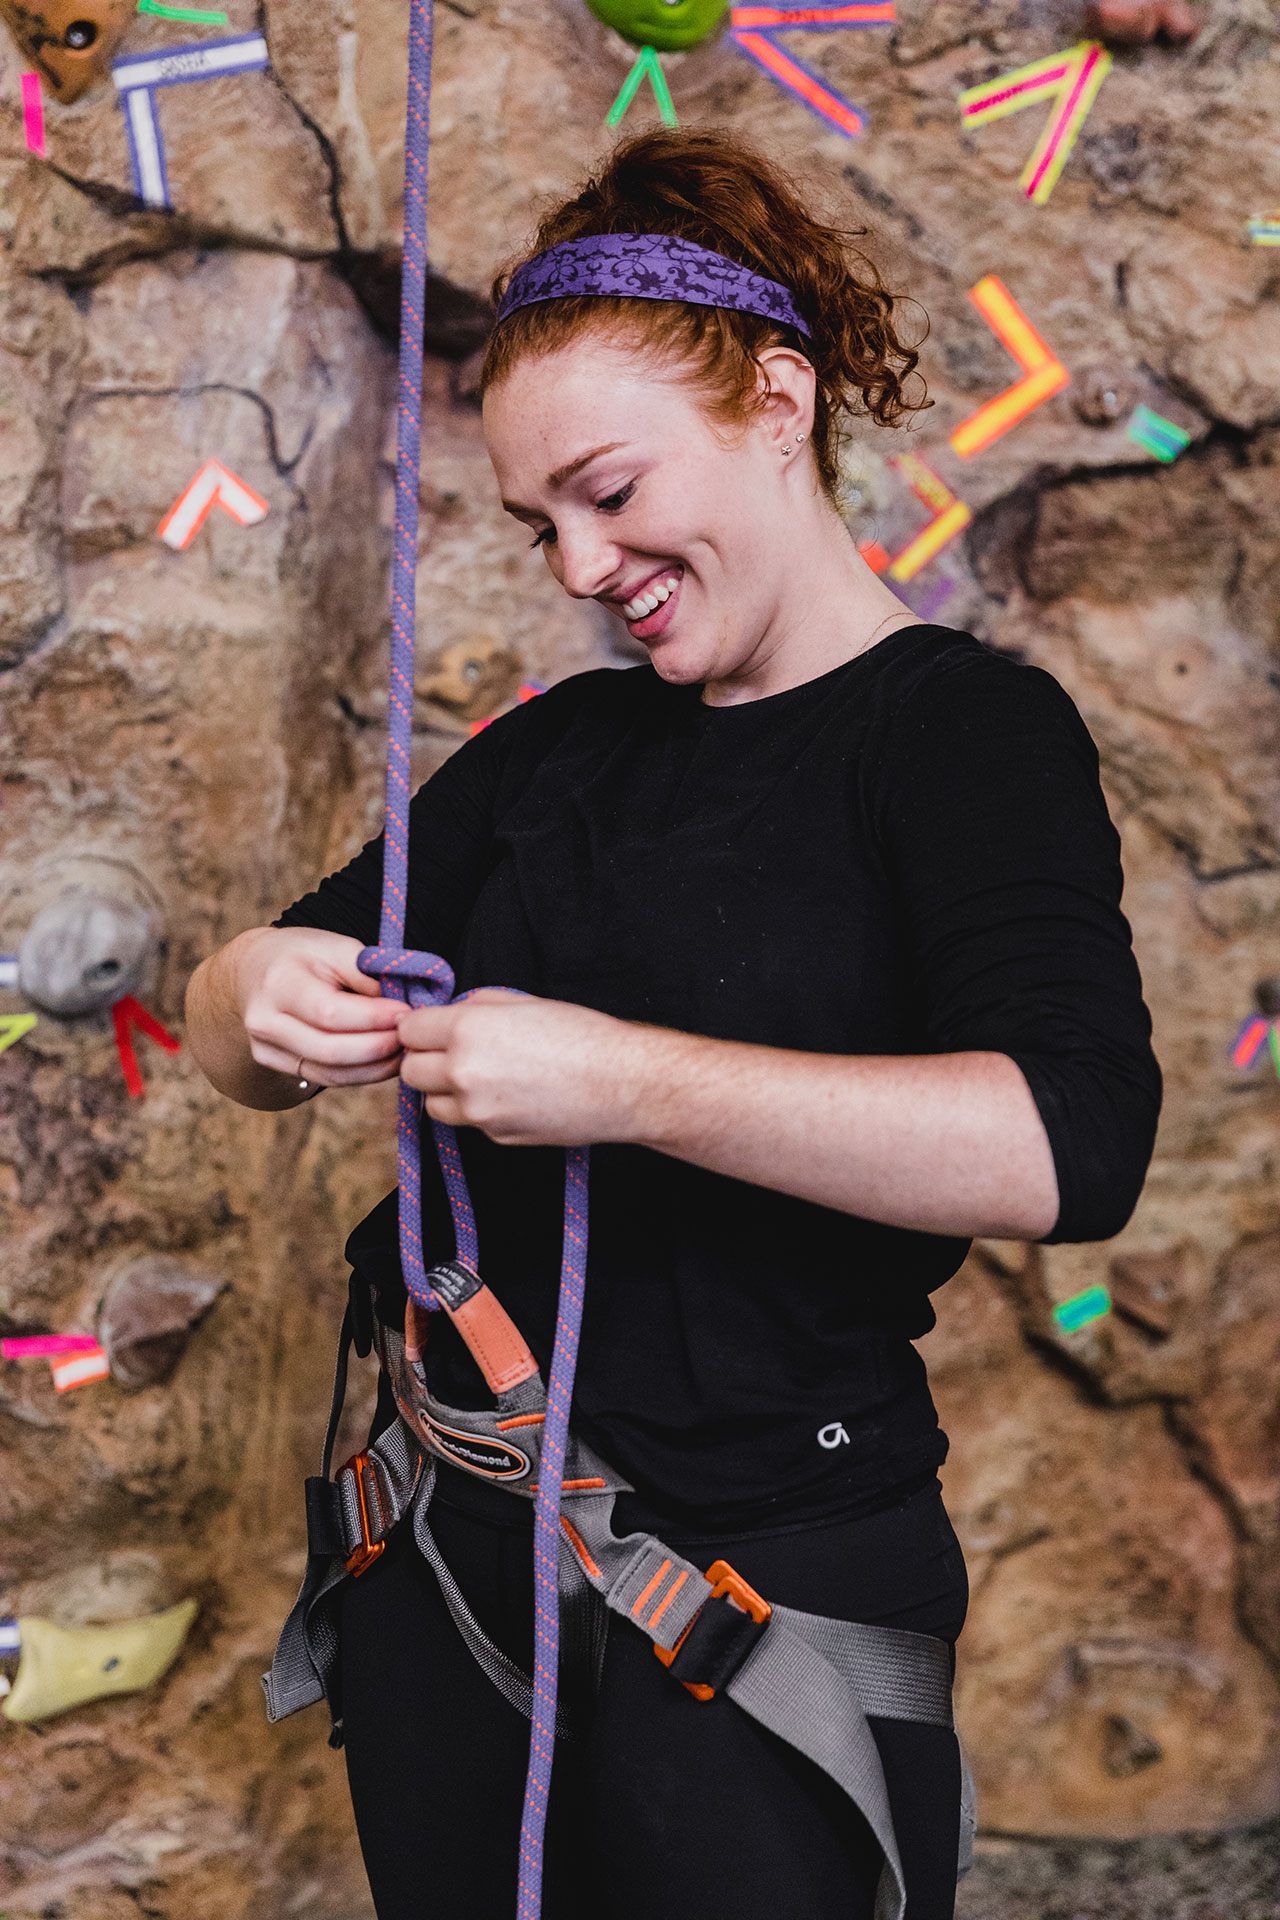 Student tying a knot for rock climbing harness.